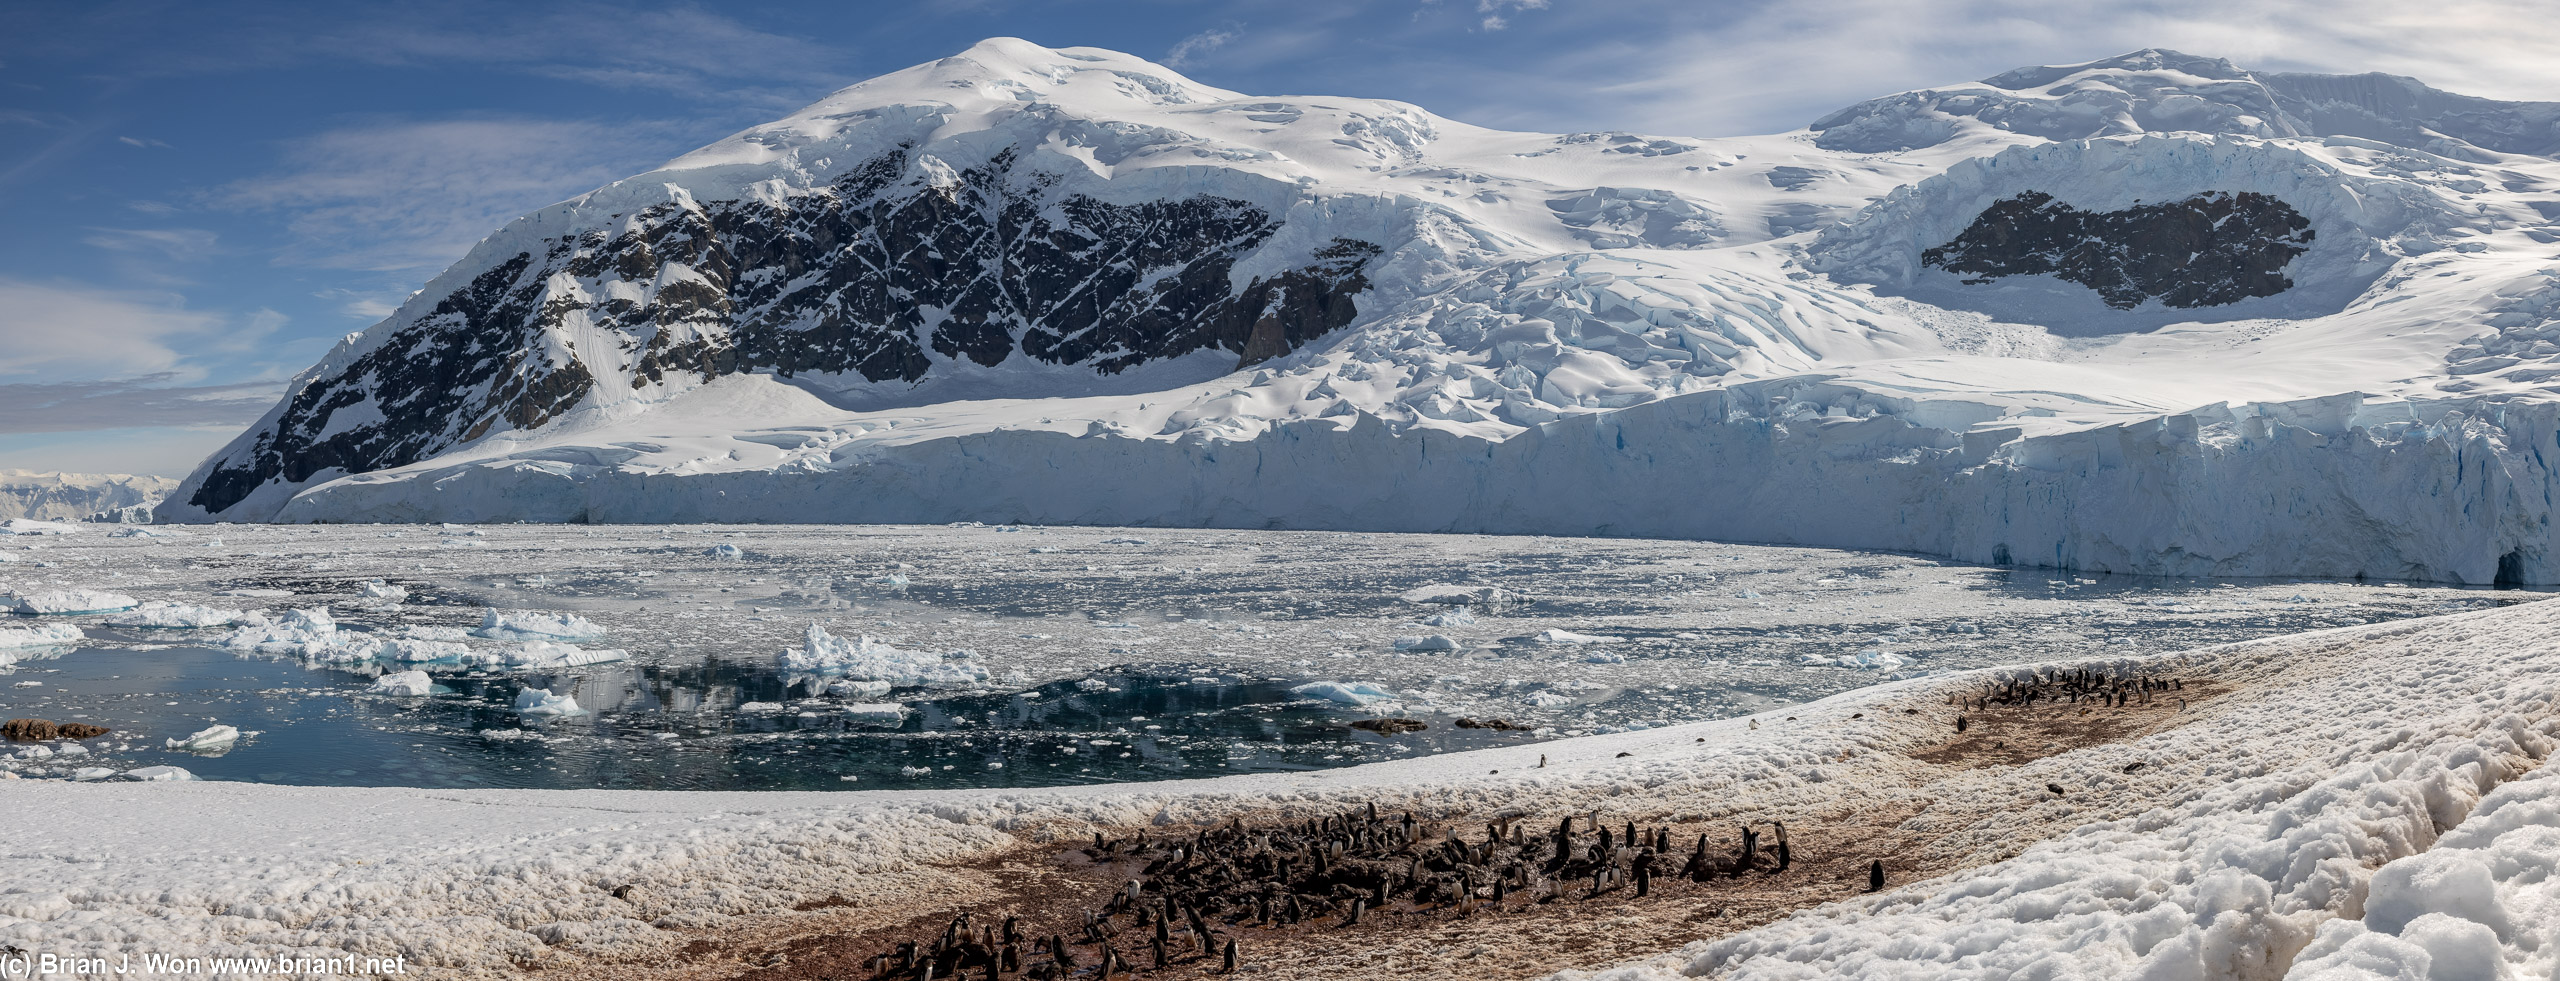 Sun, ice, mountains, glacier, water, penguins, what more could you need?